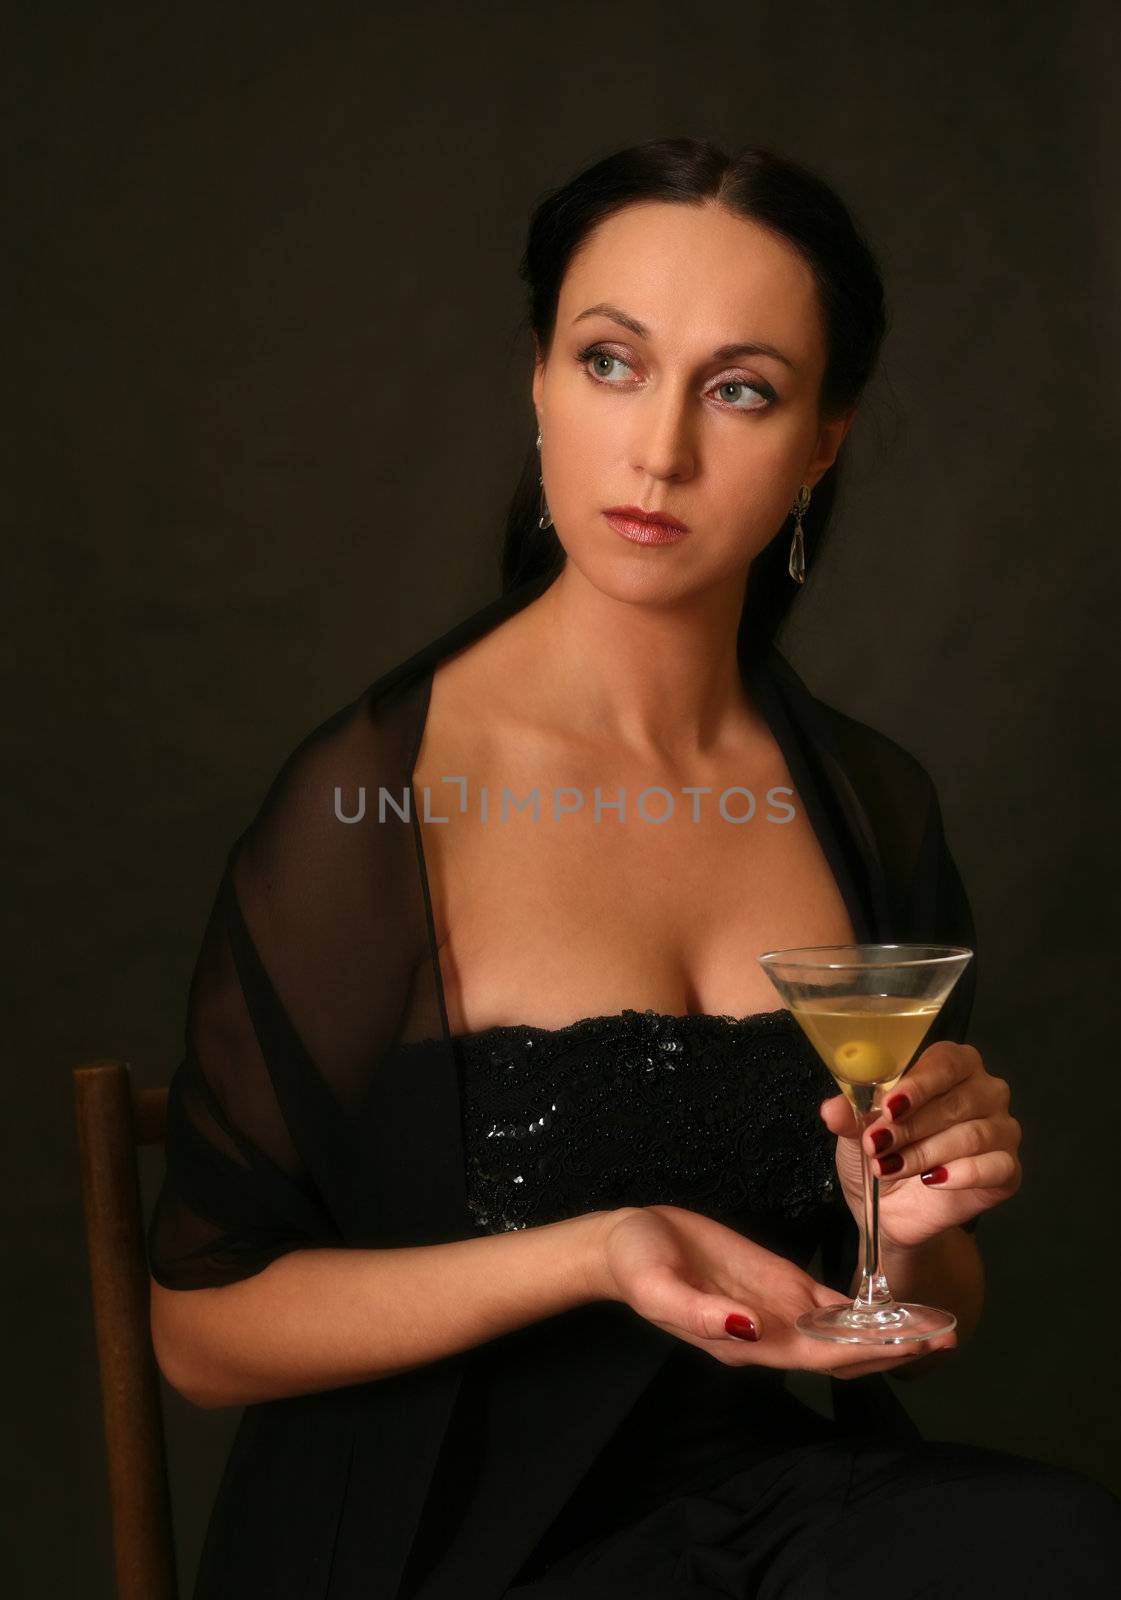 The beautiful woman with a glass of martini on a dark background